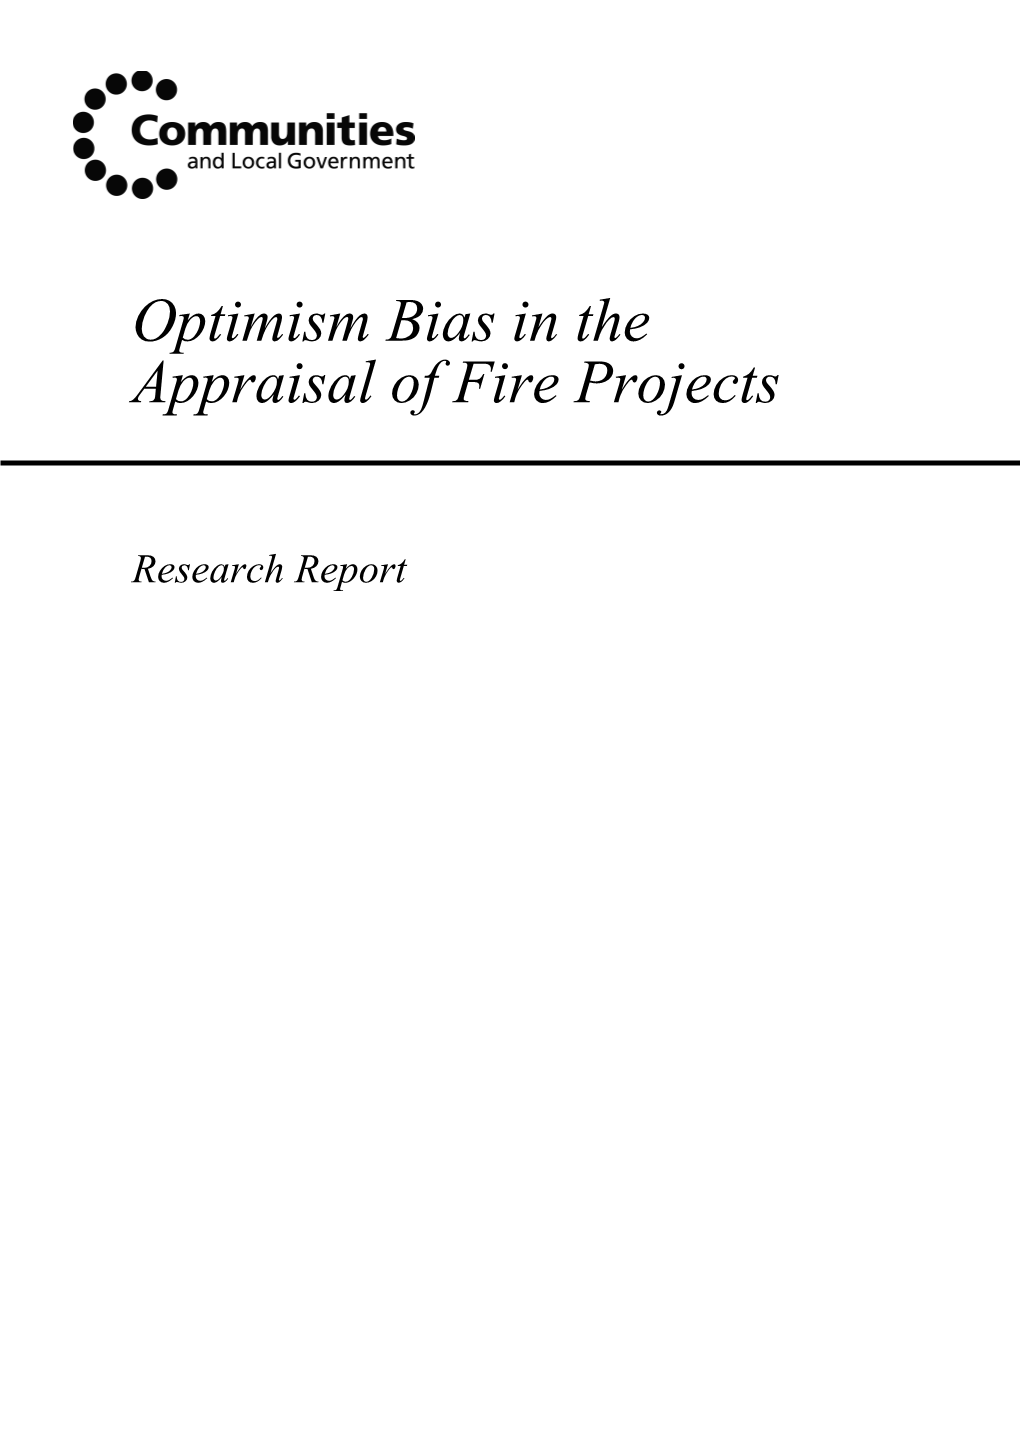 Optimism Bias in the Appraisal of Fire Projects Research Report